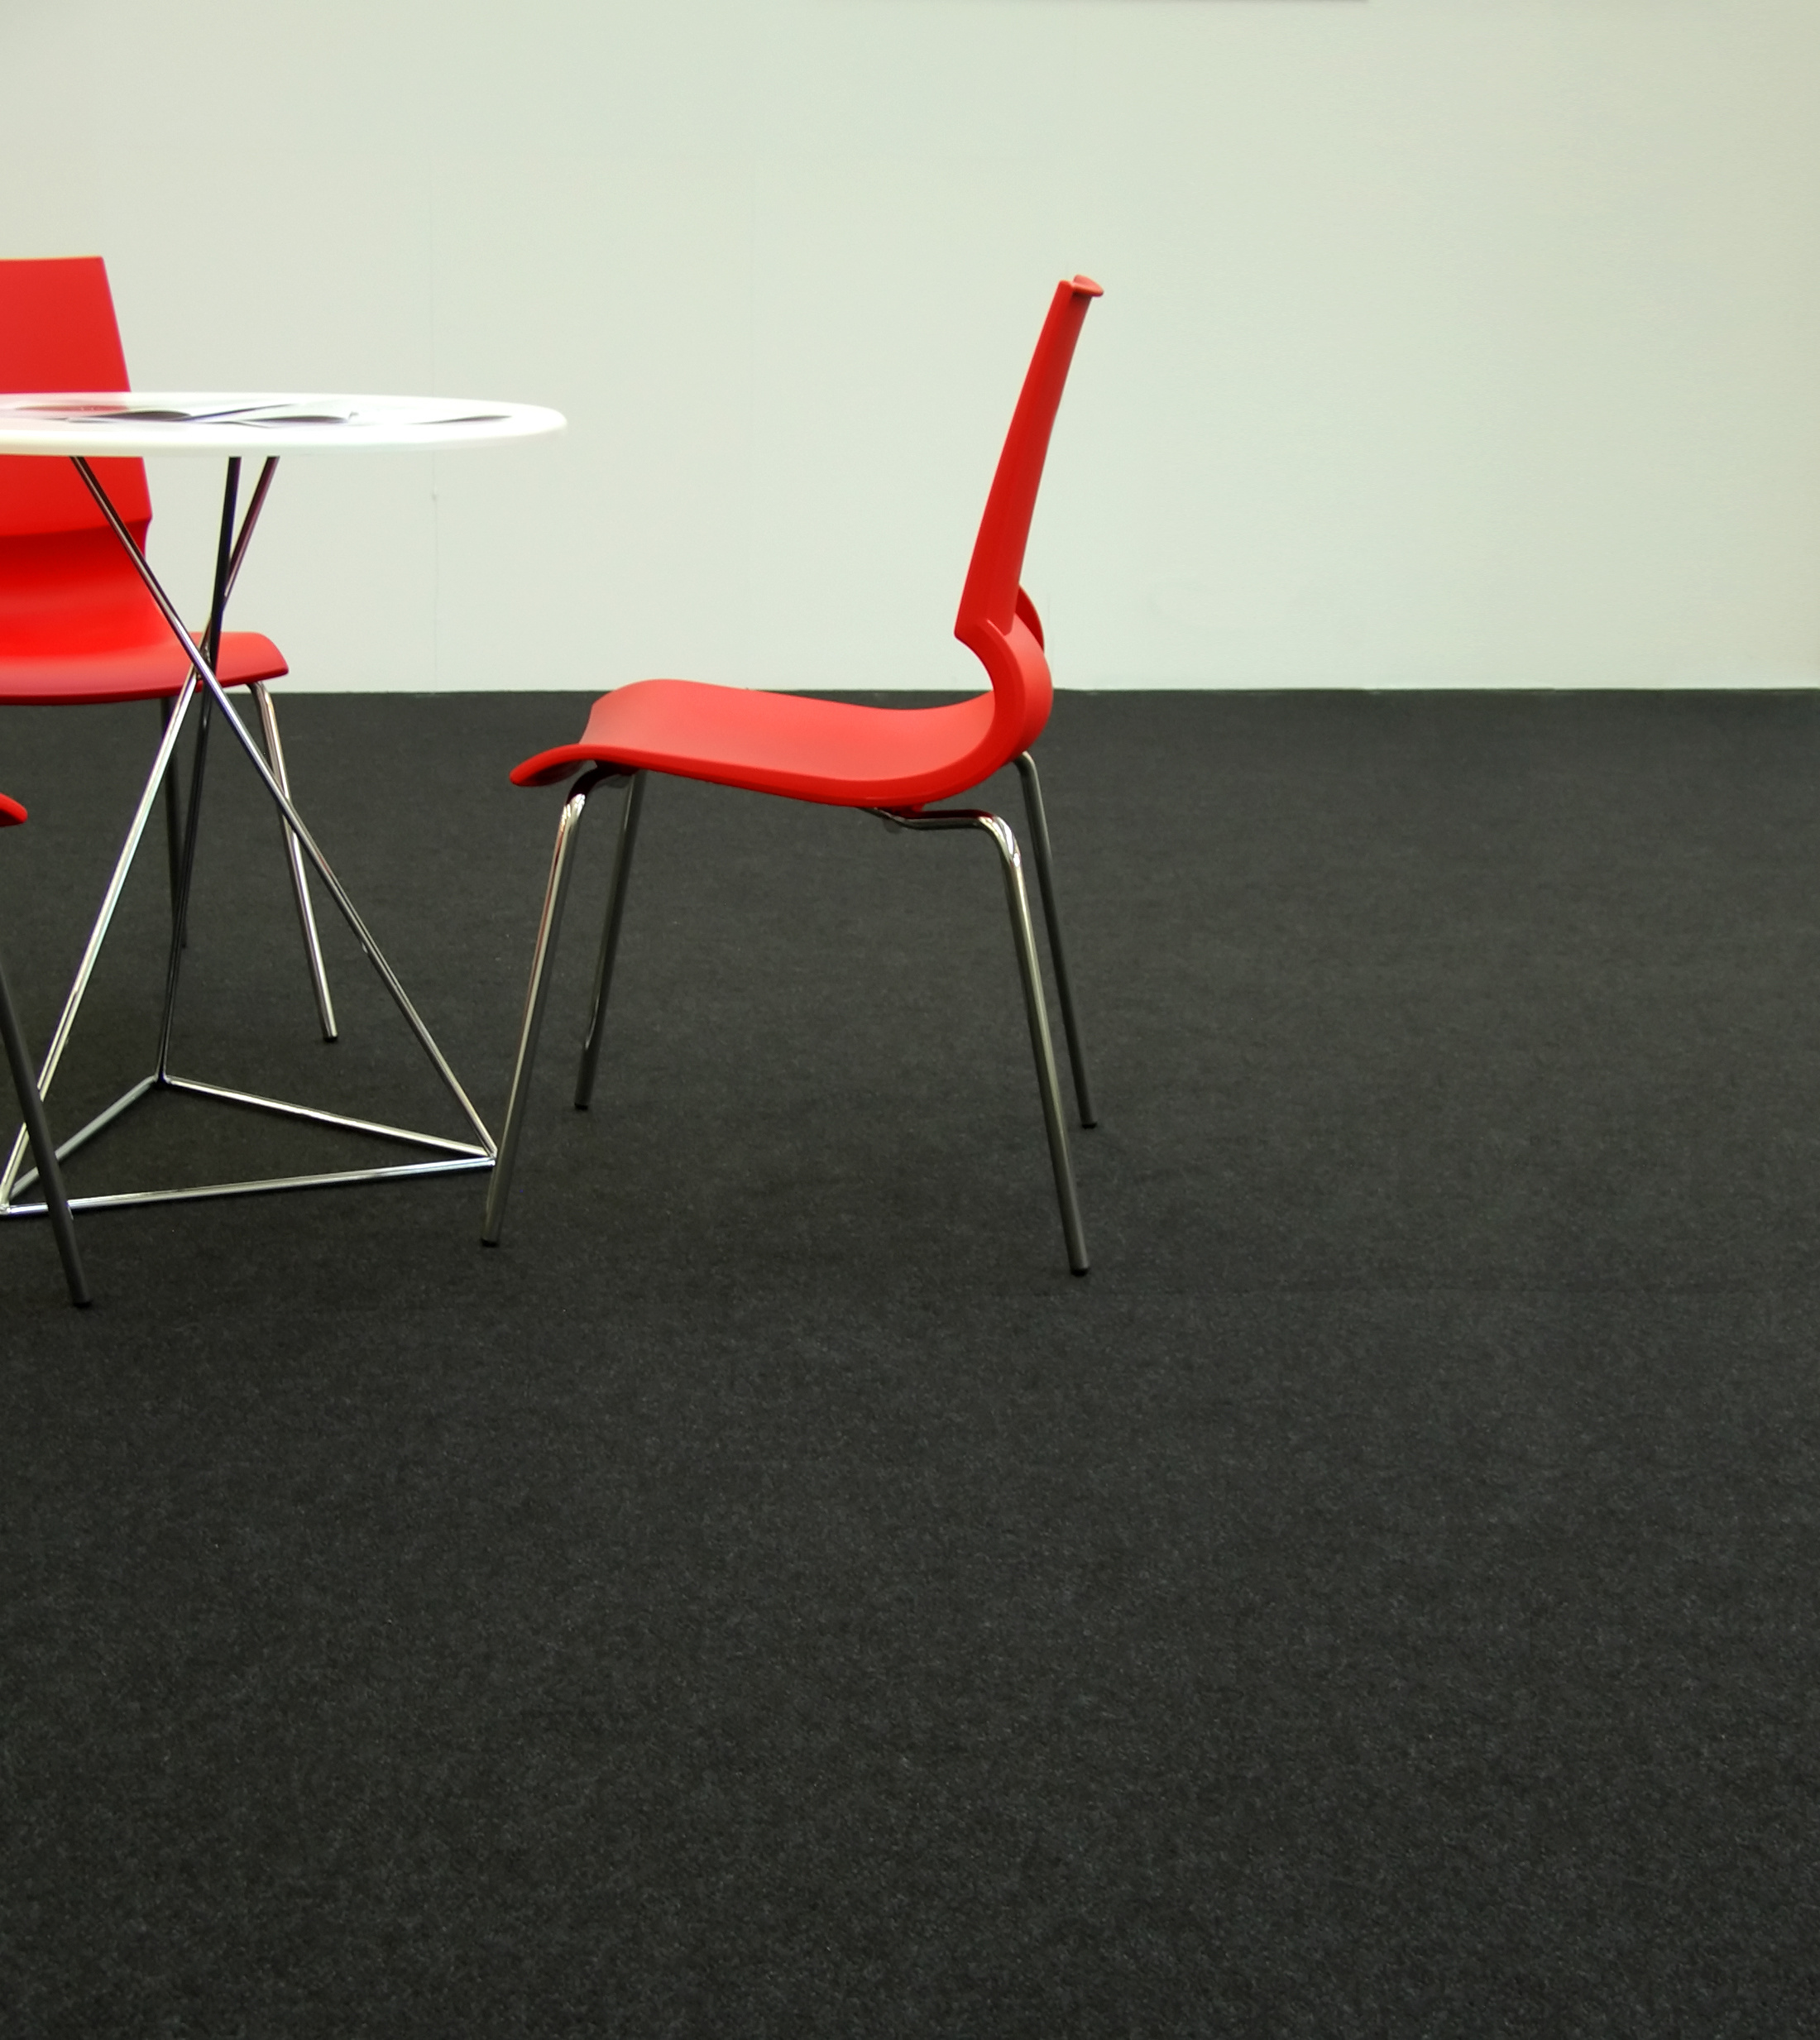 Design chairs and table in a business environment